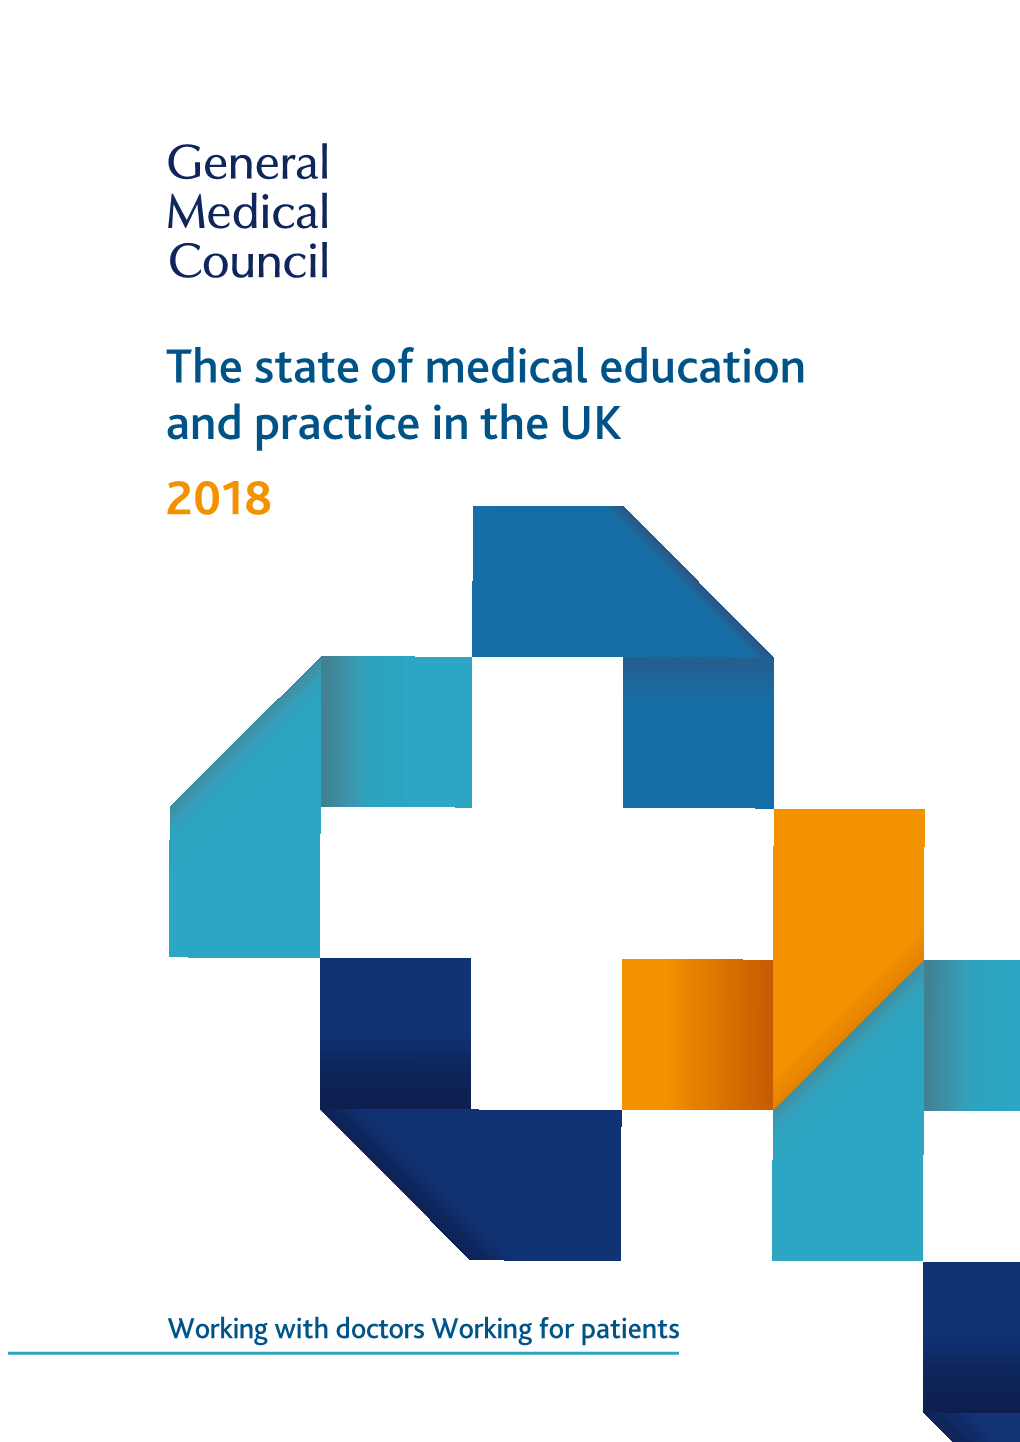 The State of Medical Education and Practice in the UK 2018